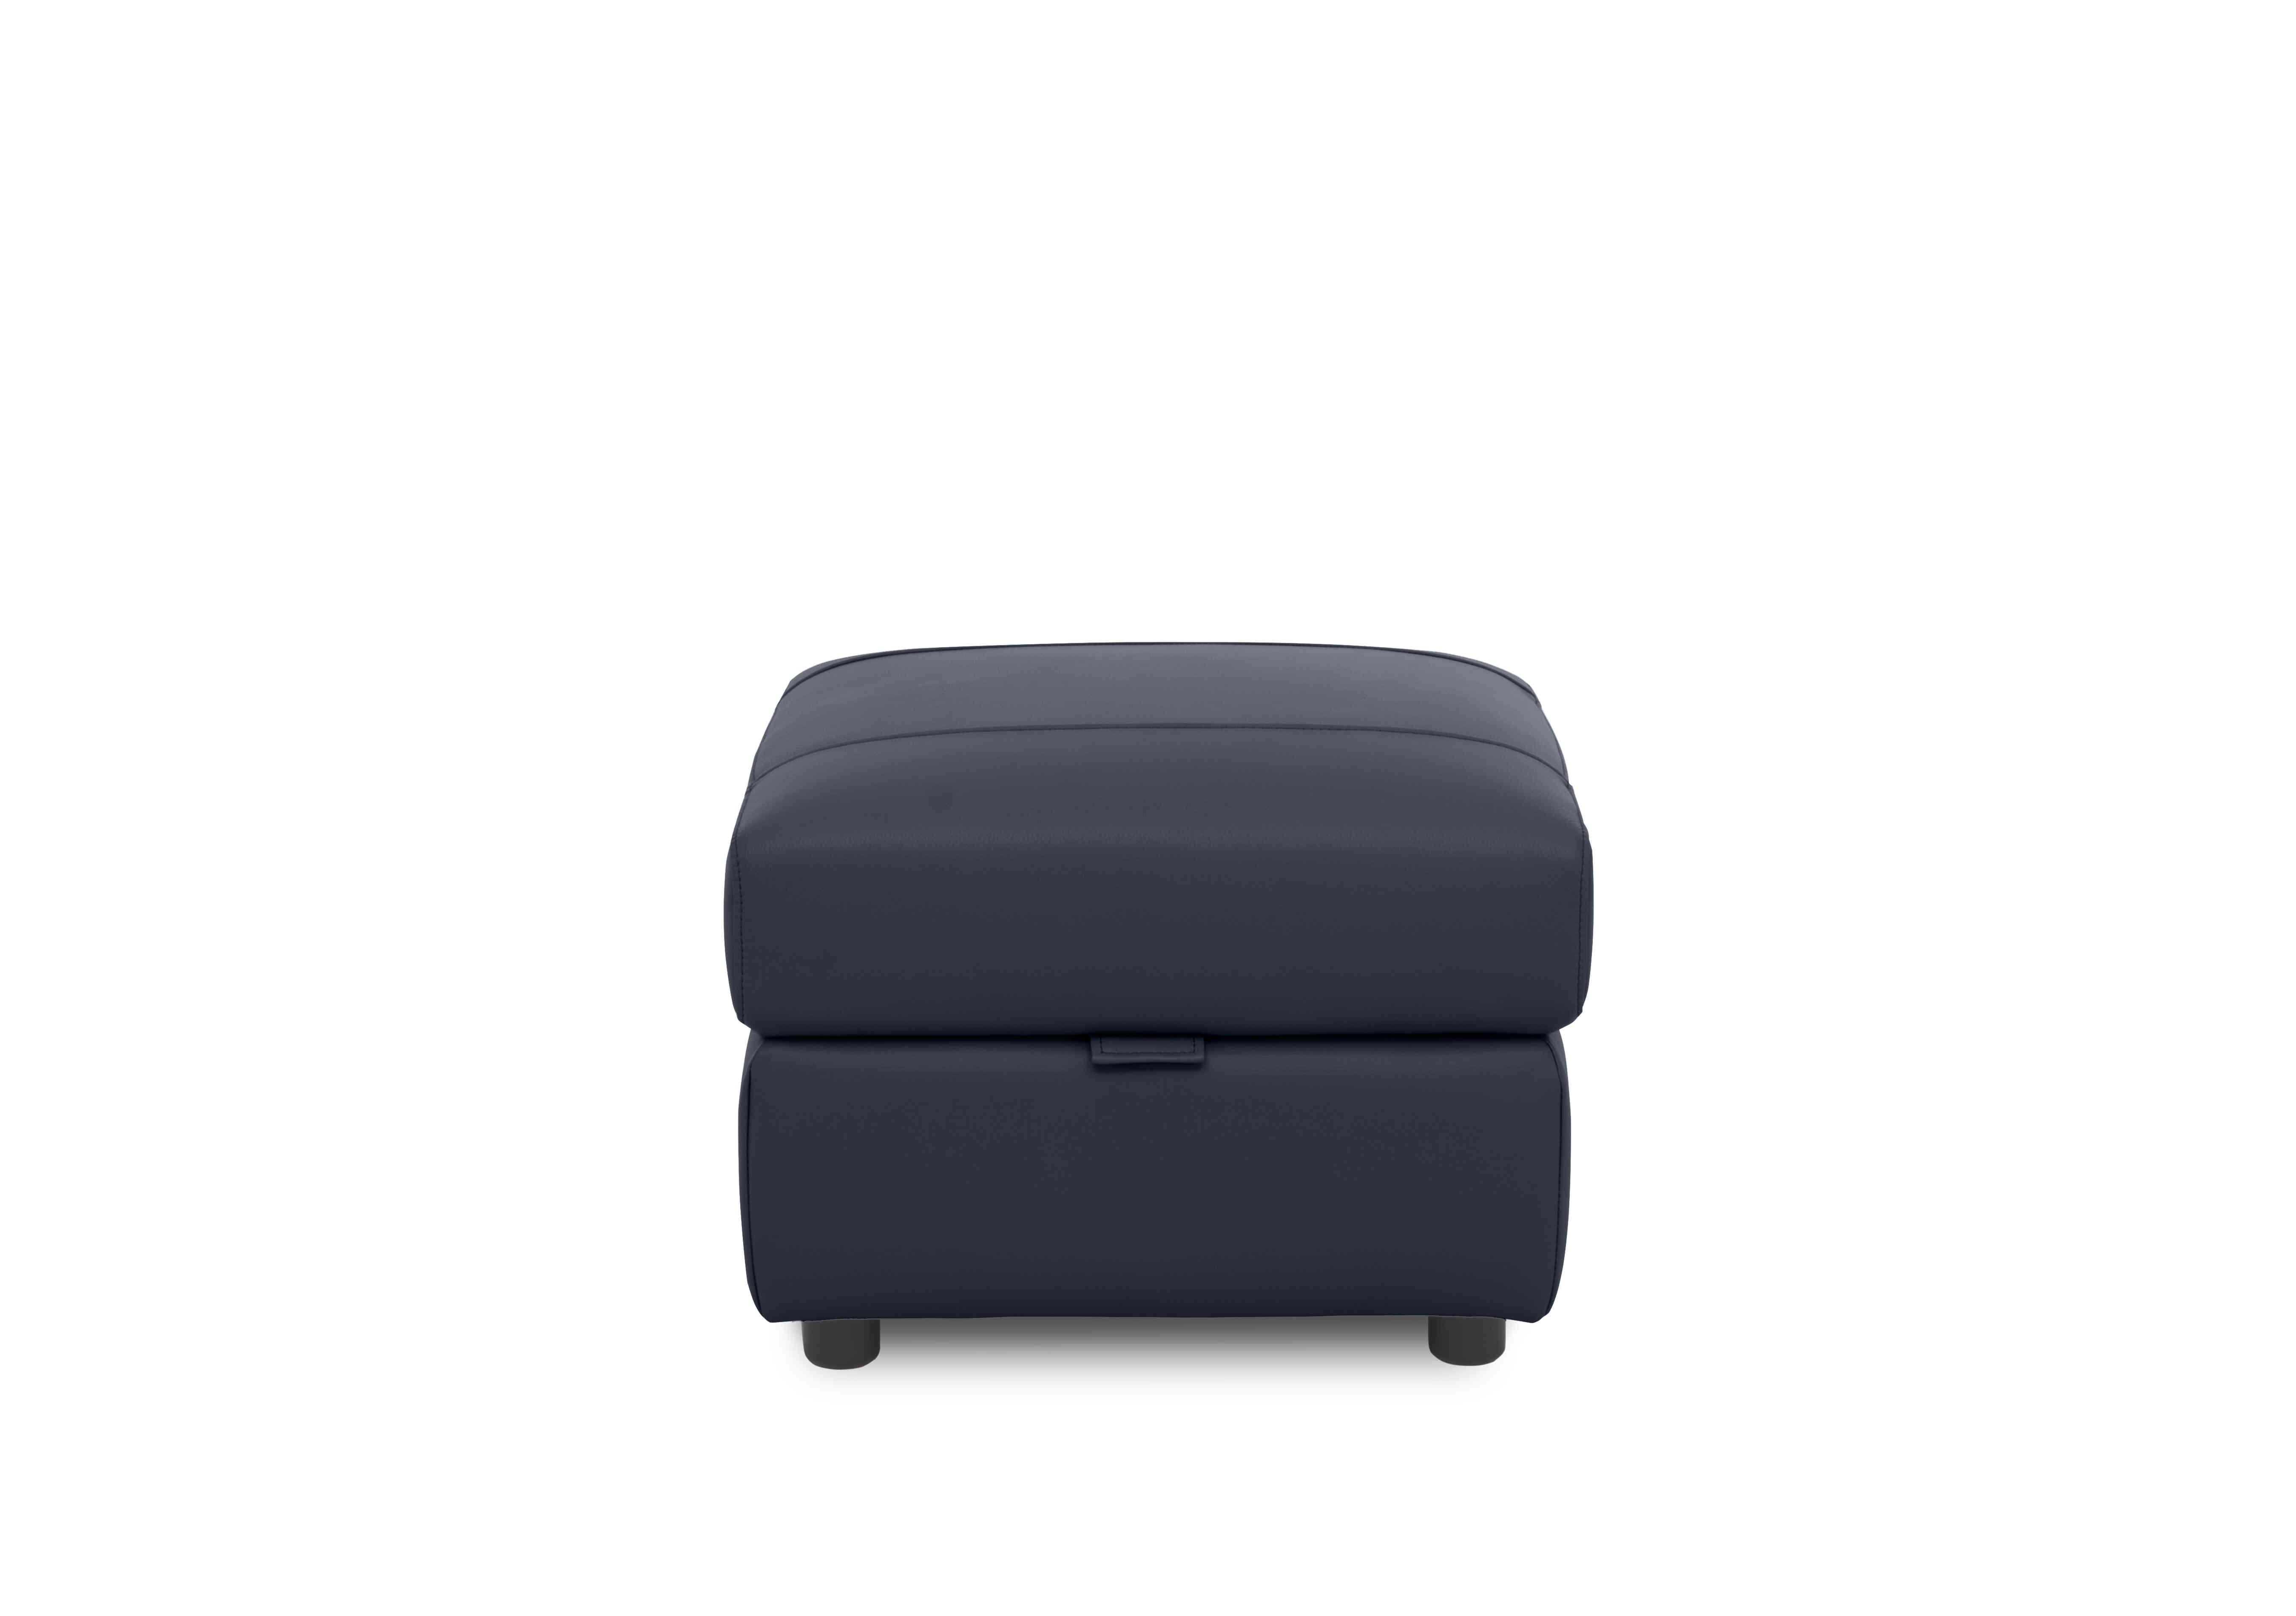 Sloane Leather Storage Footstool in Cat-40/09 Peacock on Furniture Village